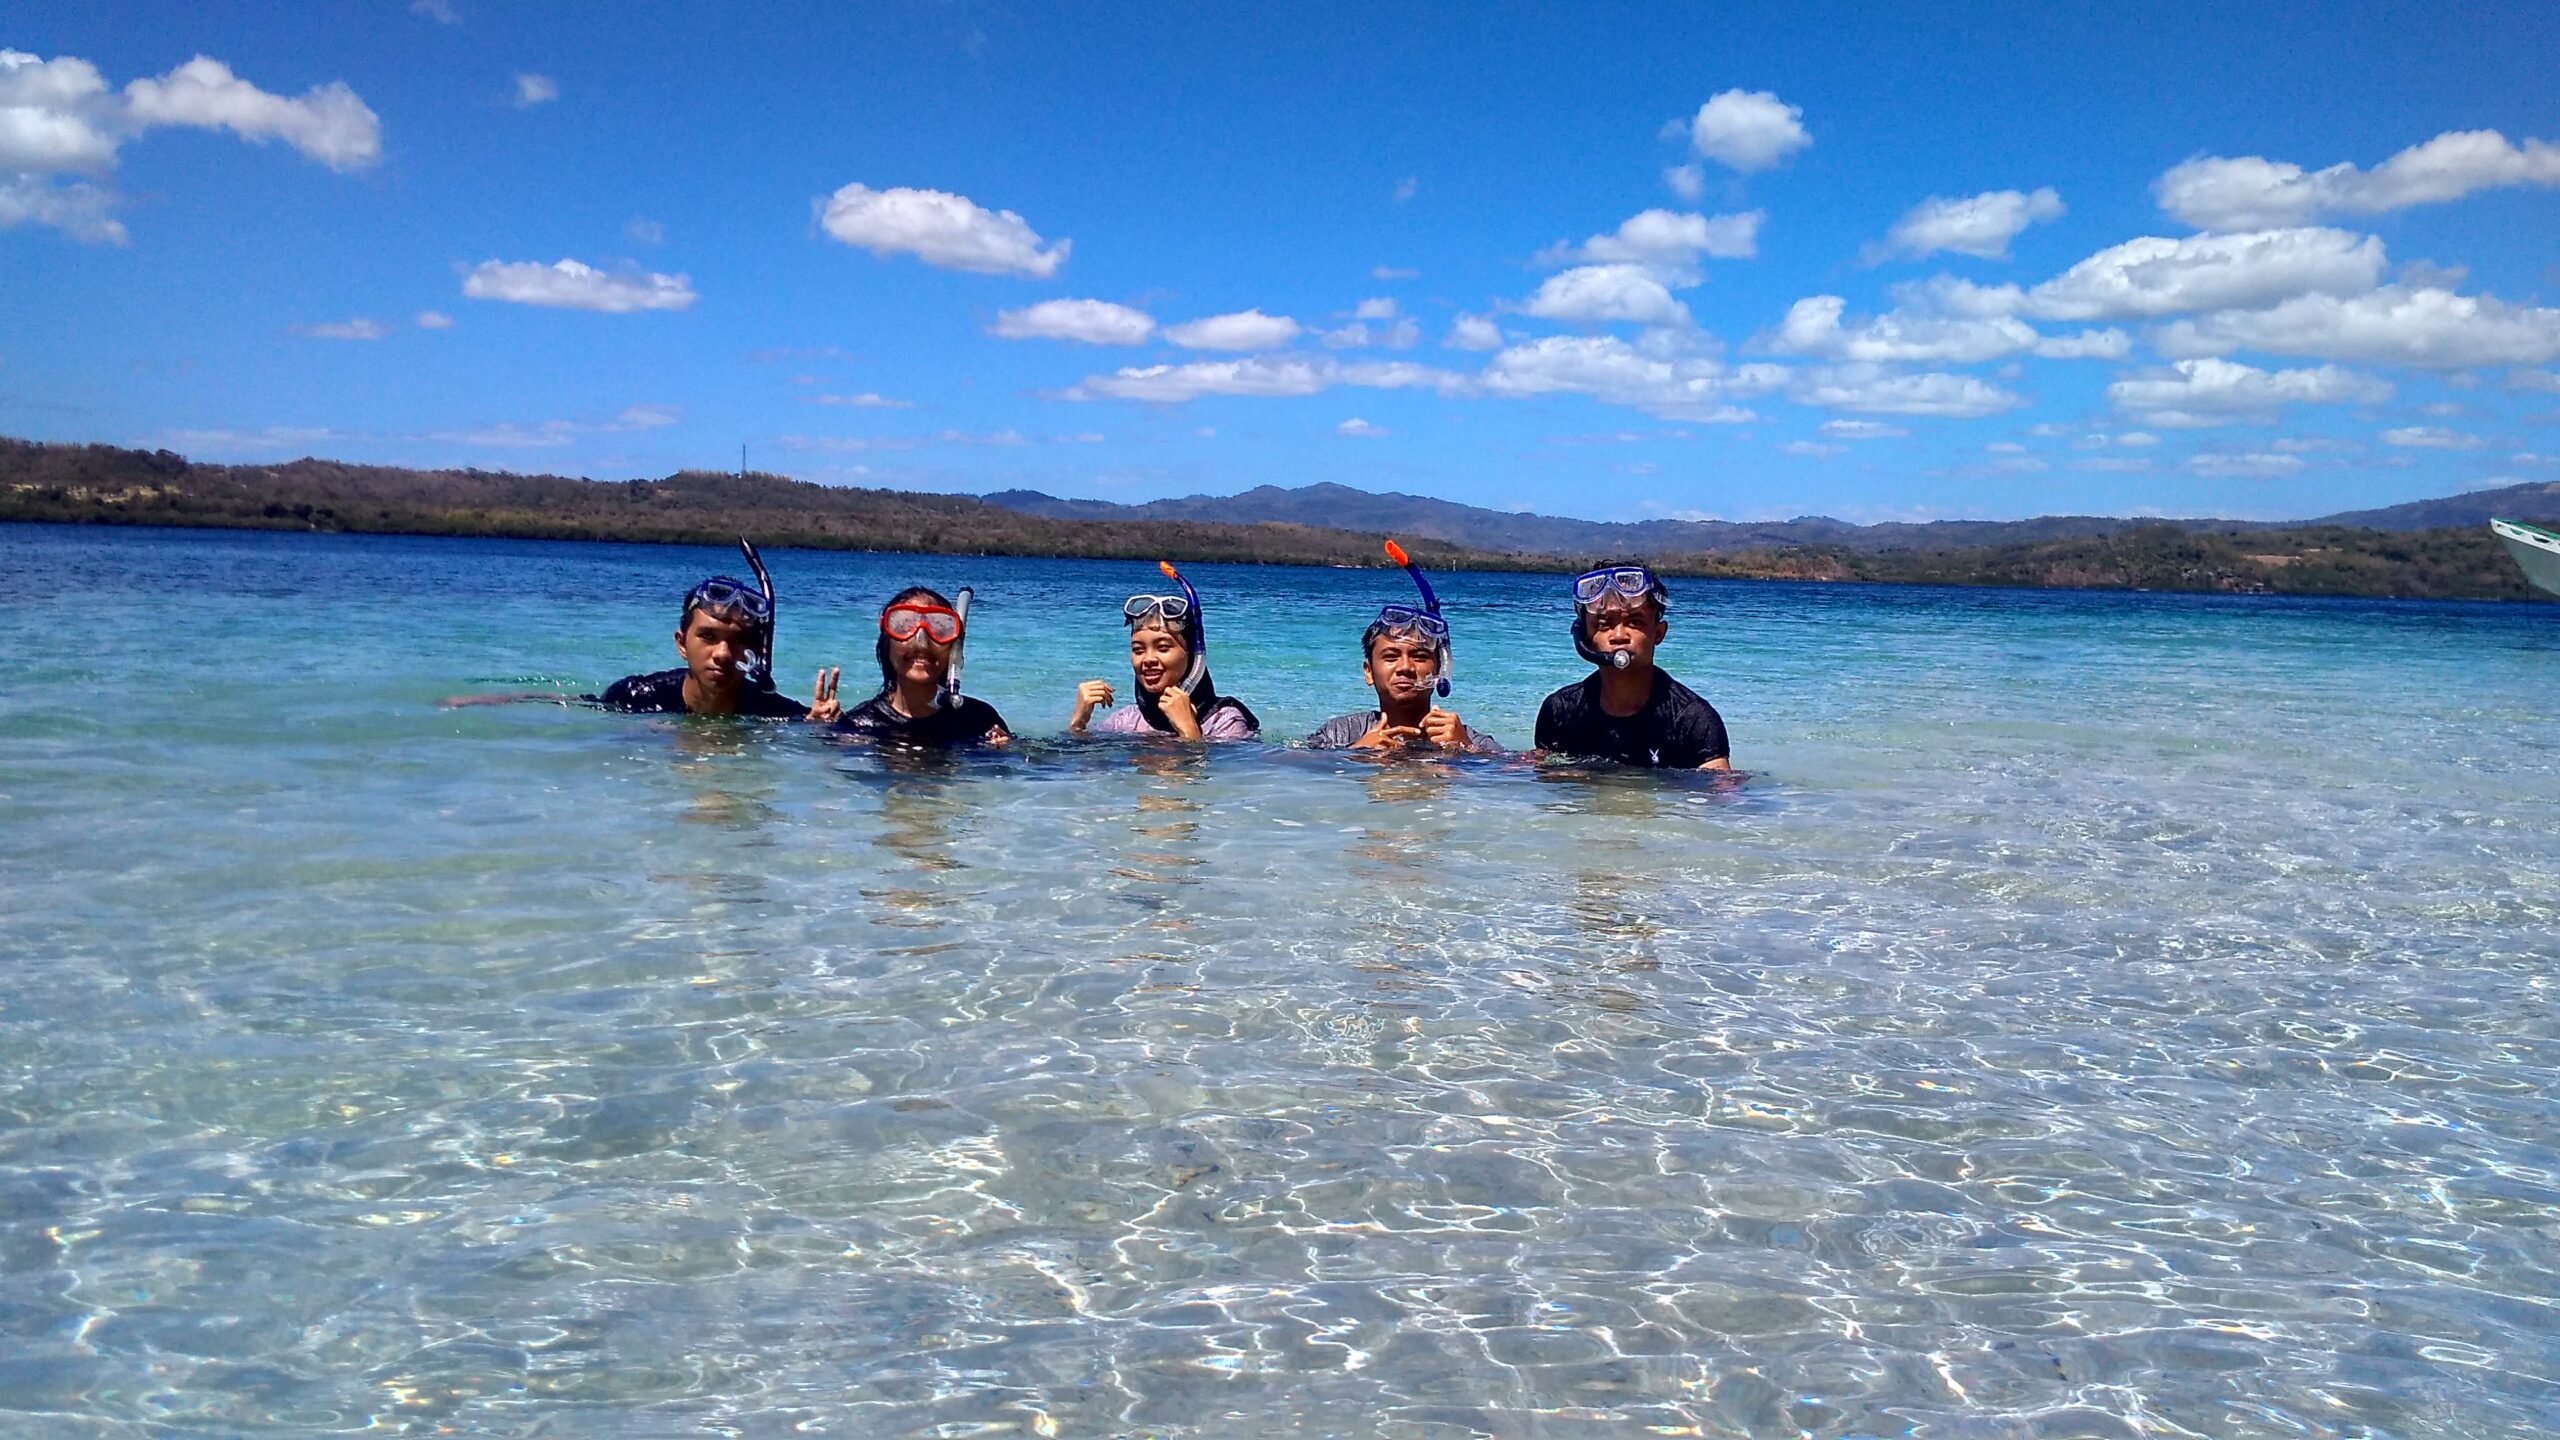 8 Things To Do In Bulalacao - snorkeling, kayaking, scuba diving